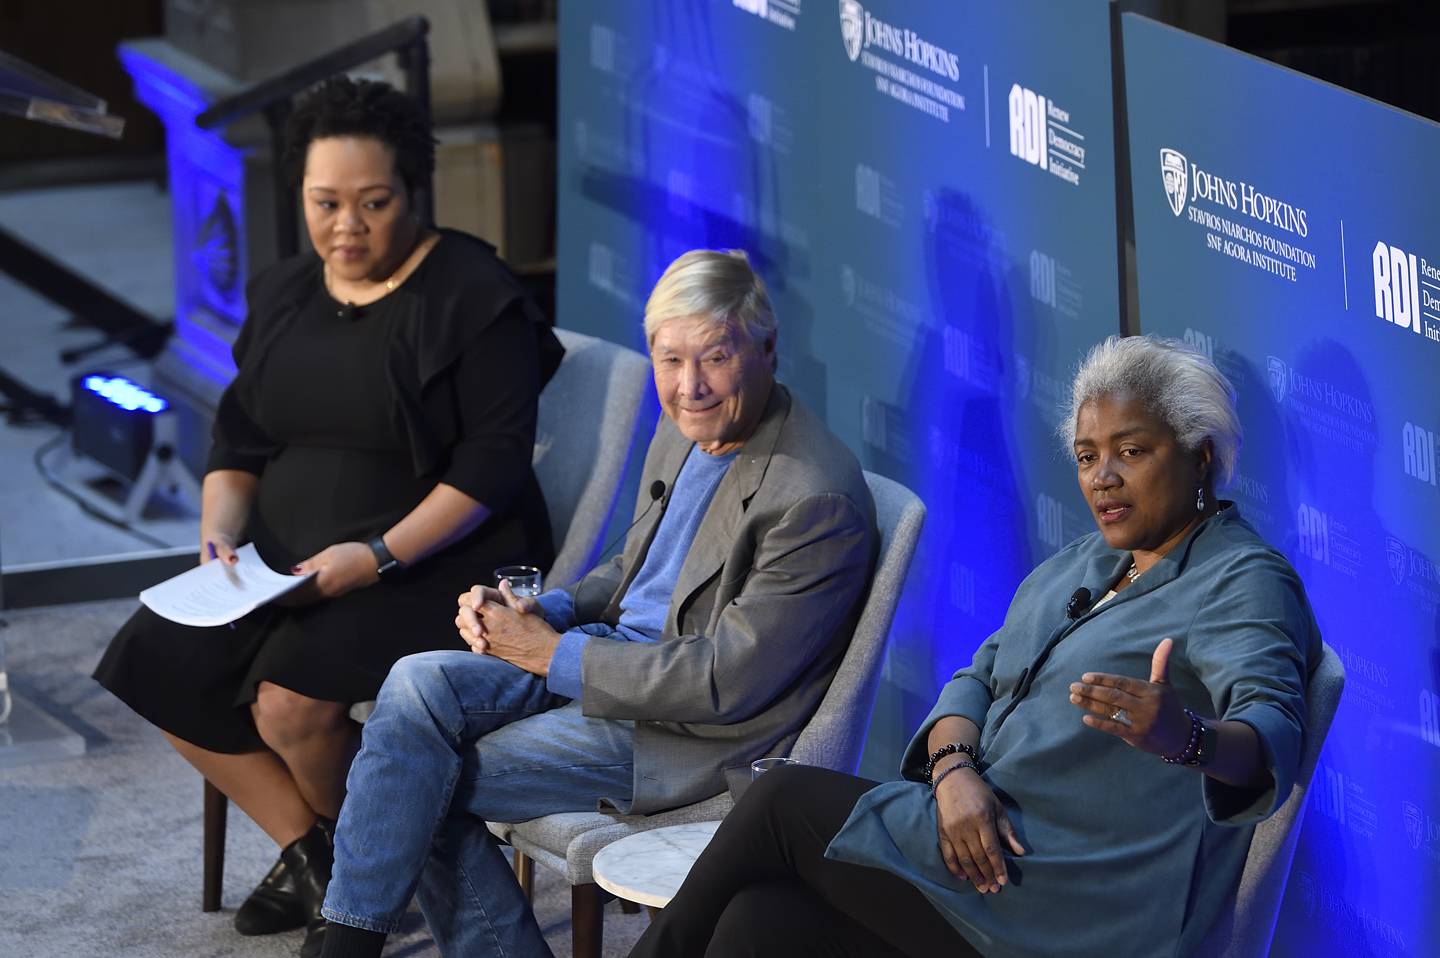 Richard North Patterson and Donna Brazile